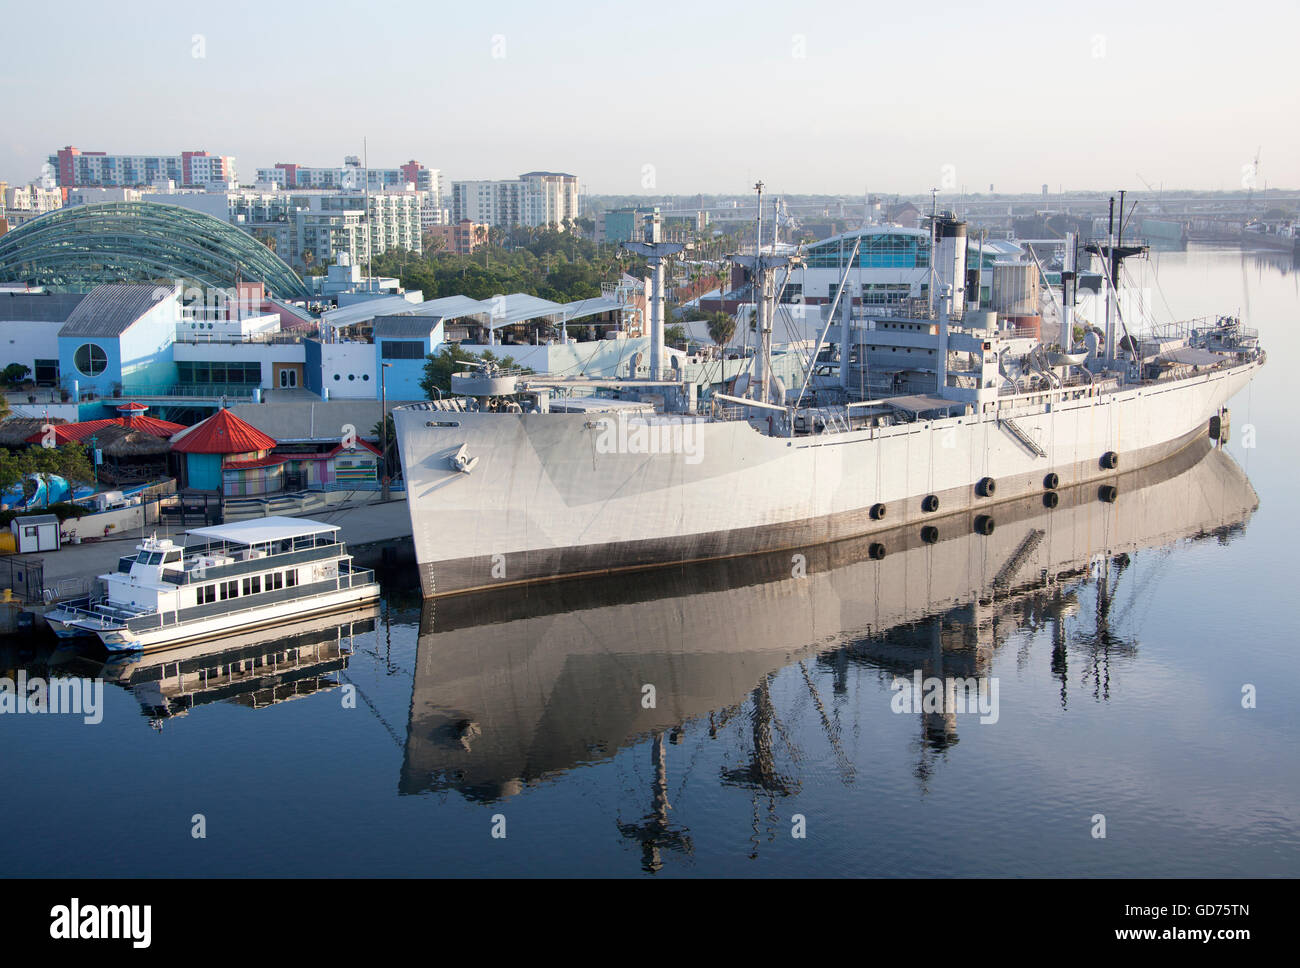 Calm morning view of a military ship docked in Tampa (Florida). Stock Photo